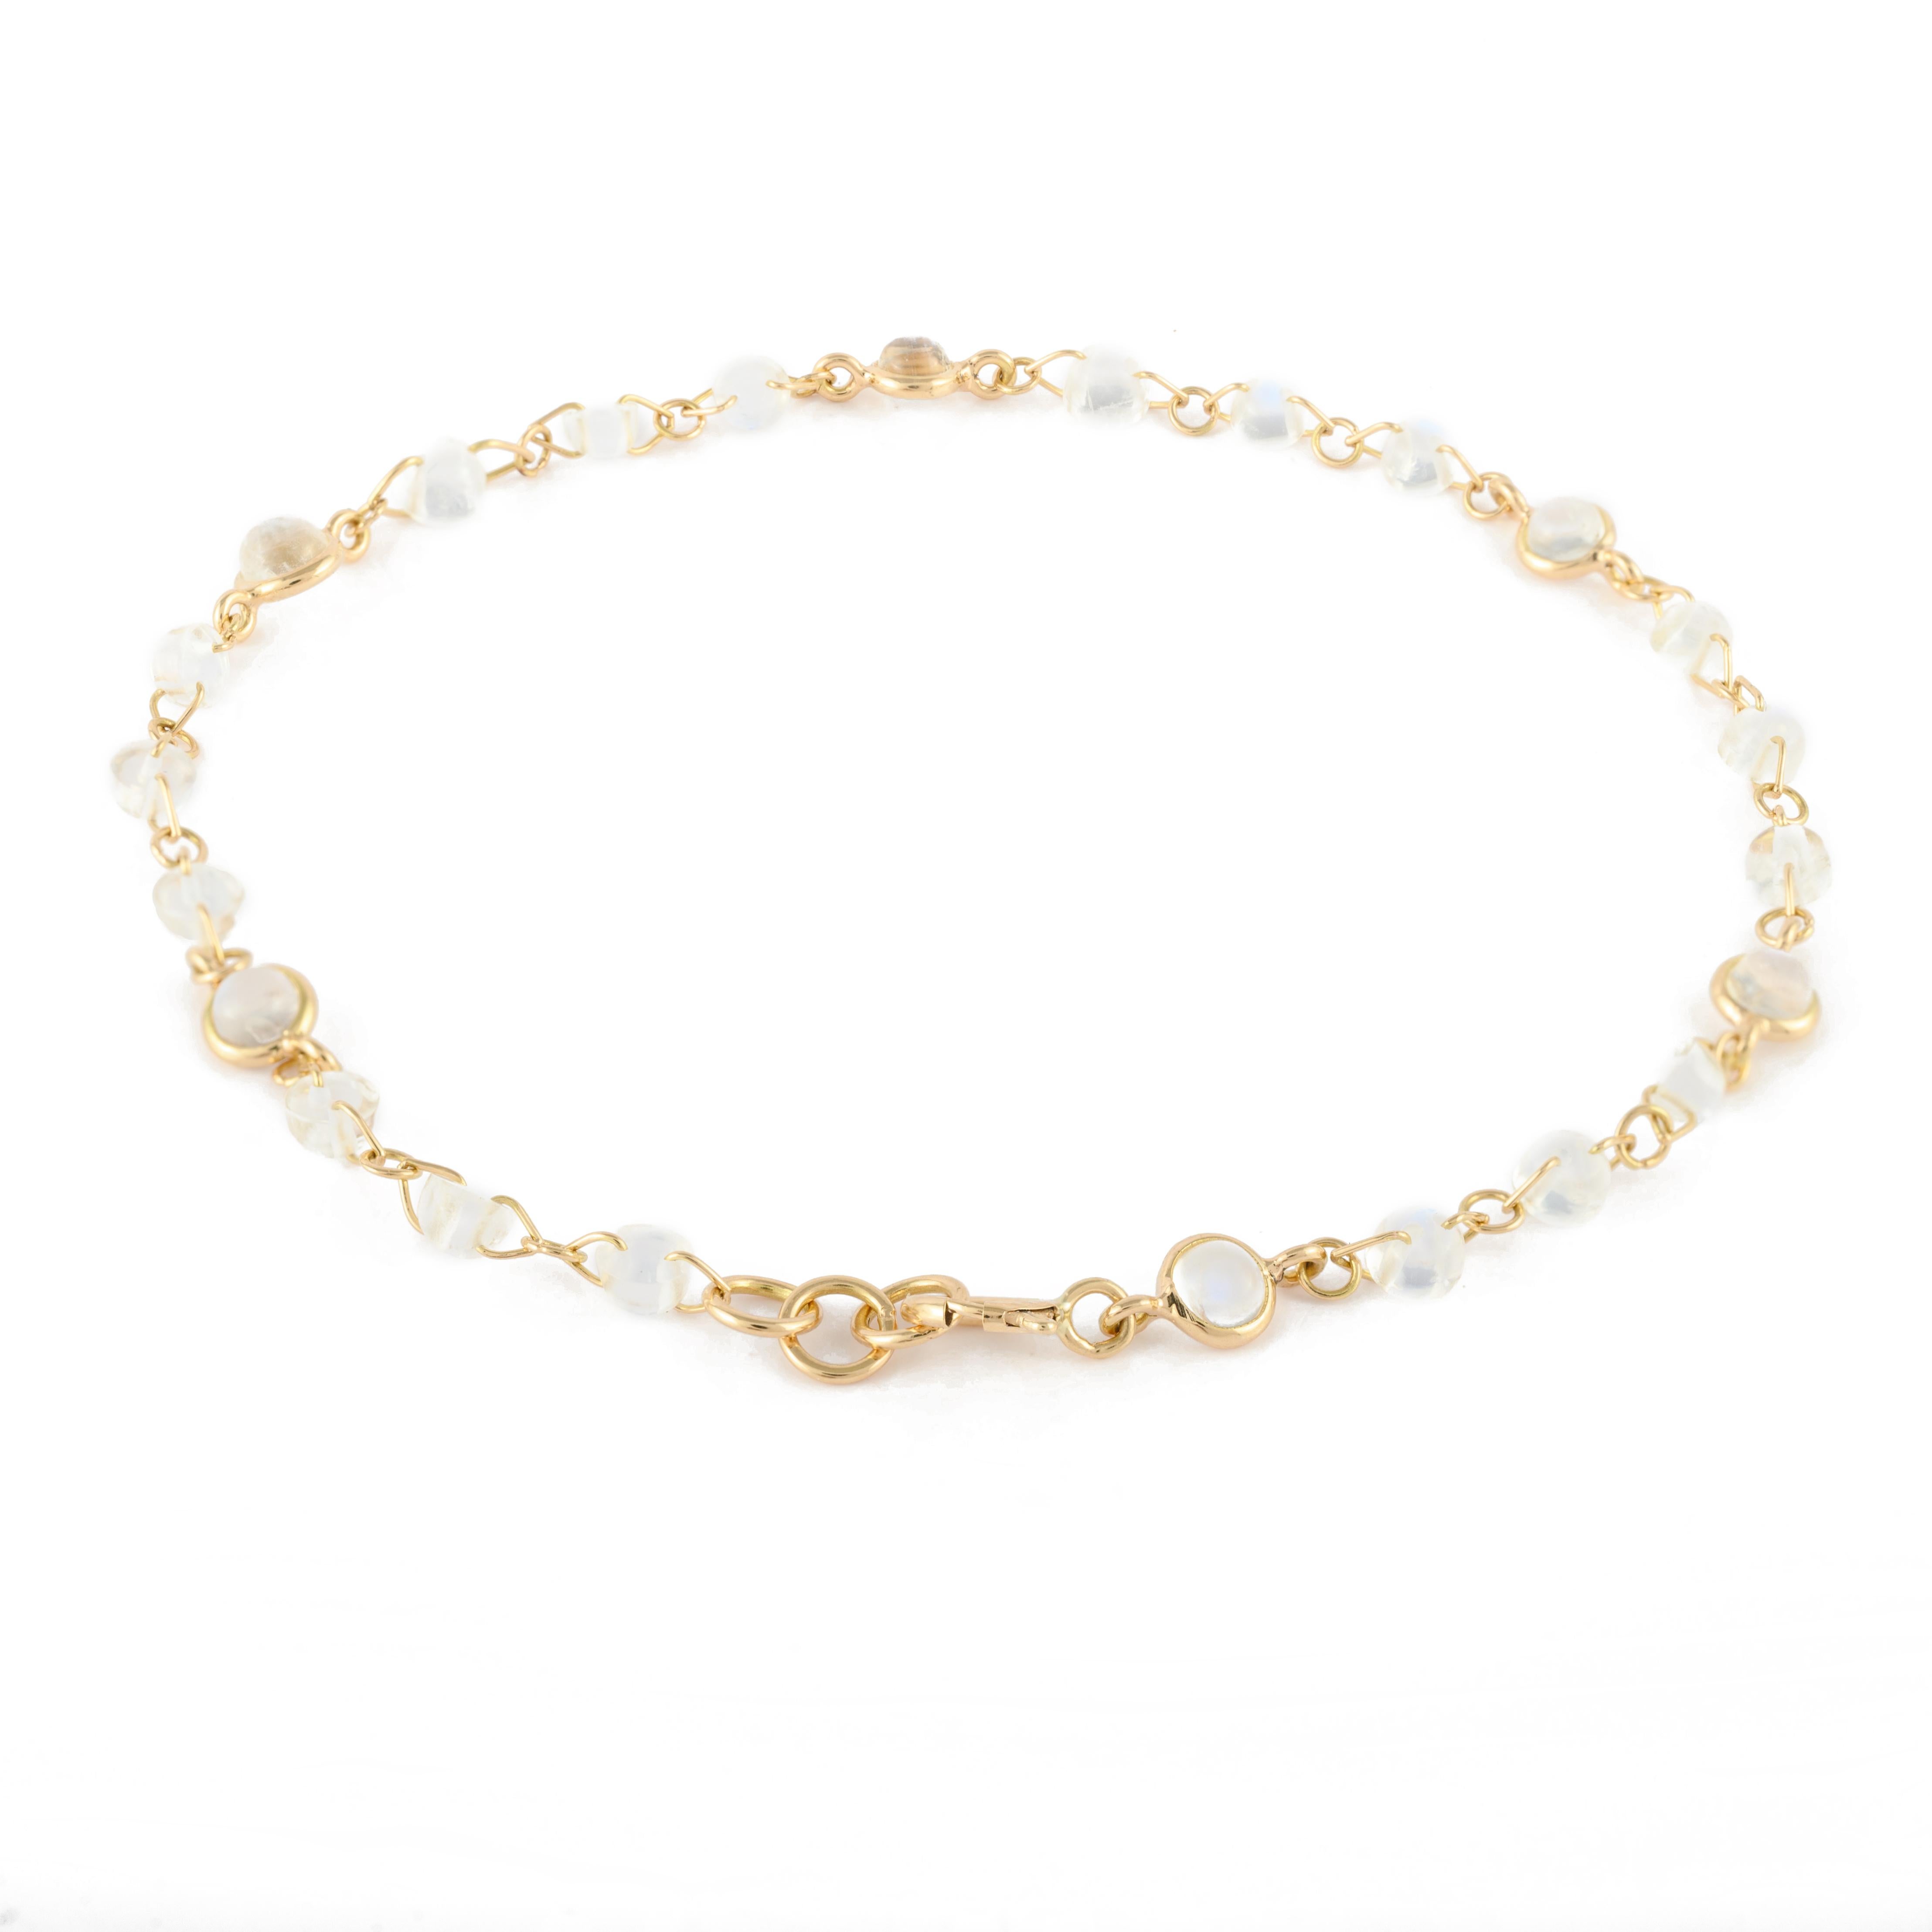 Solid 18k Yellow Gold 6.29 Carat Rainbow Moonstone Chain Bracelet For Sale 1